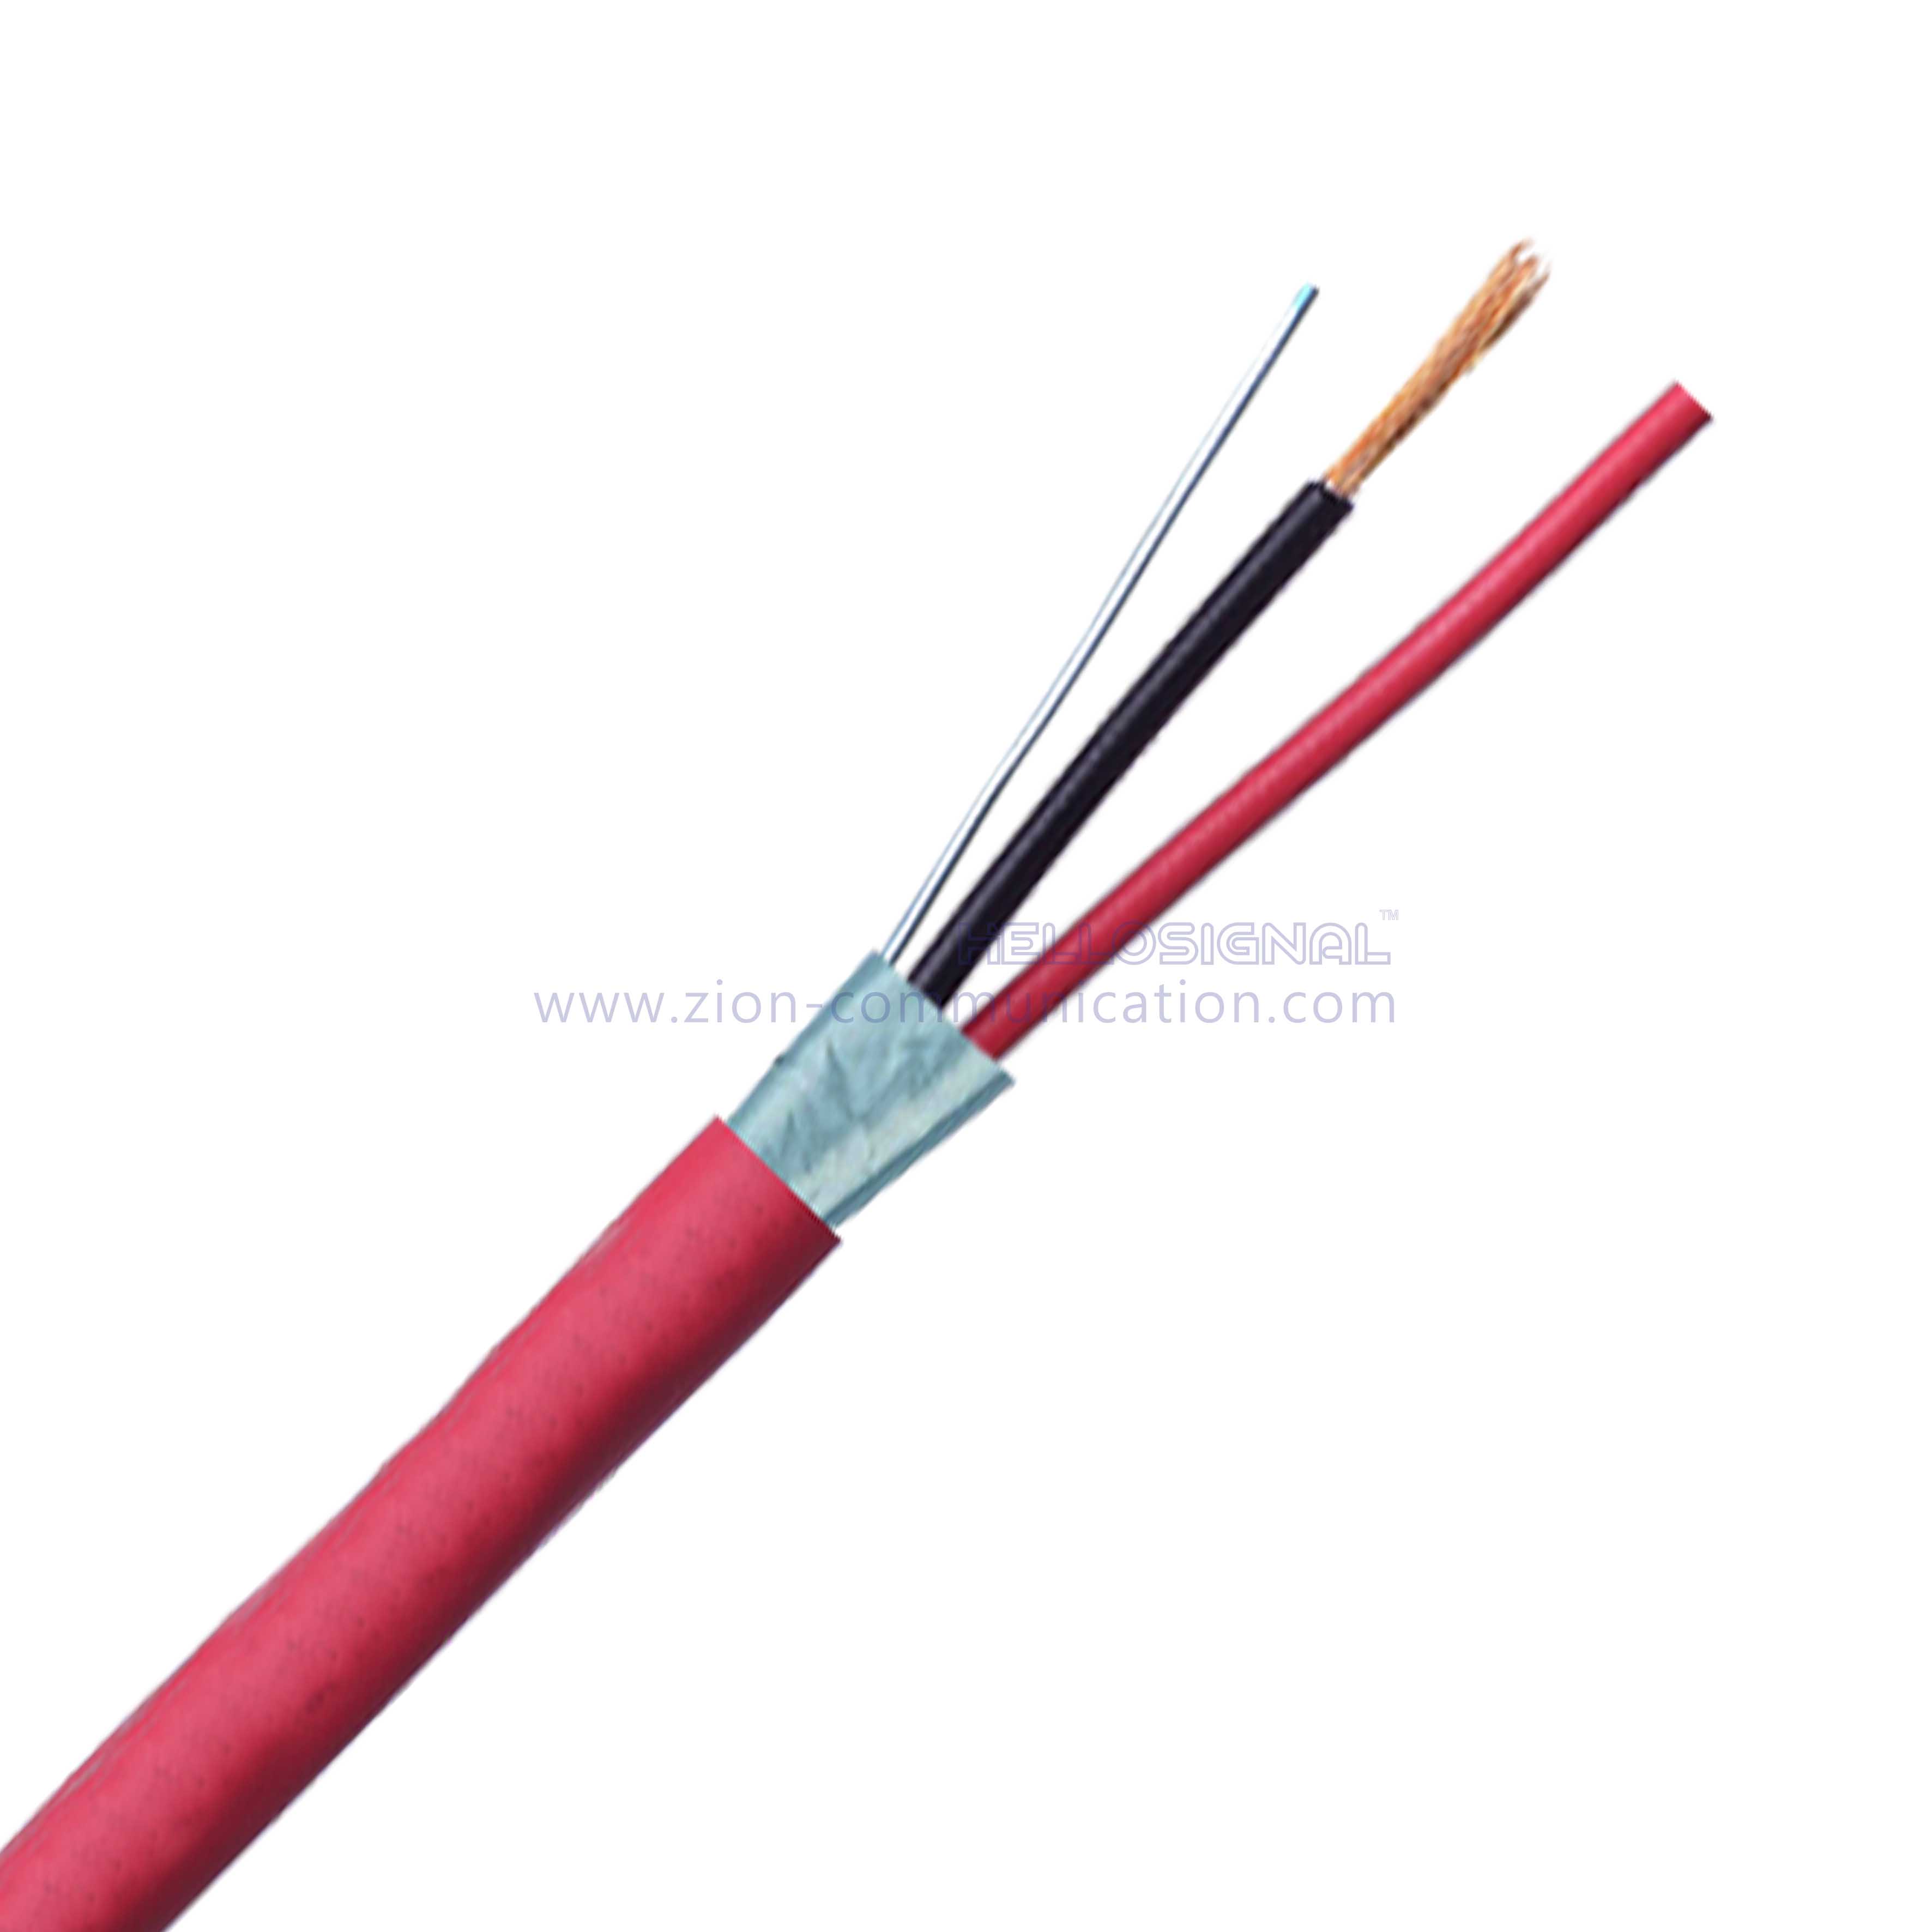 NO.7110302 18AWG 2/C STR Shielded FPL-CL2 Fire Alarm Cables